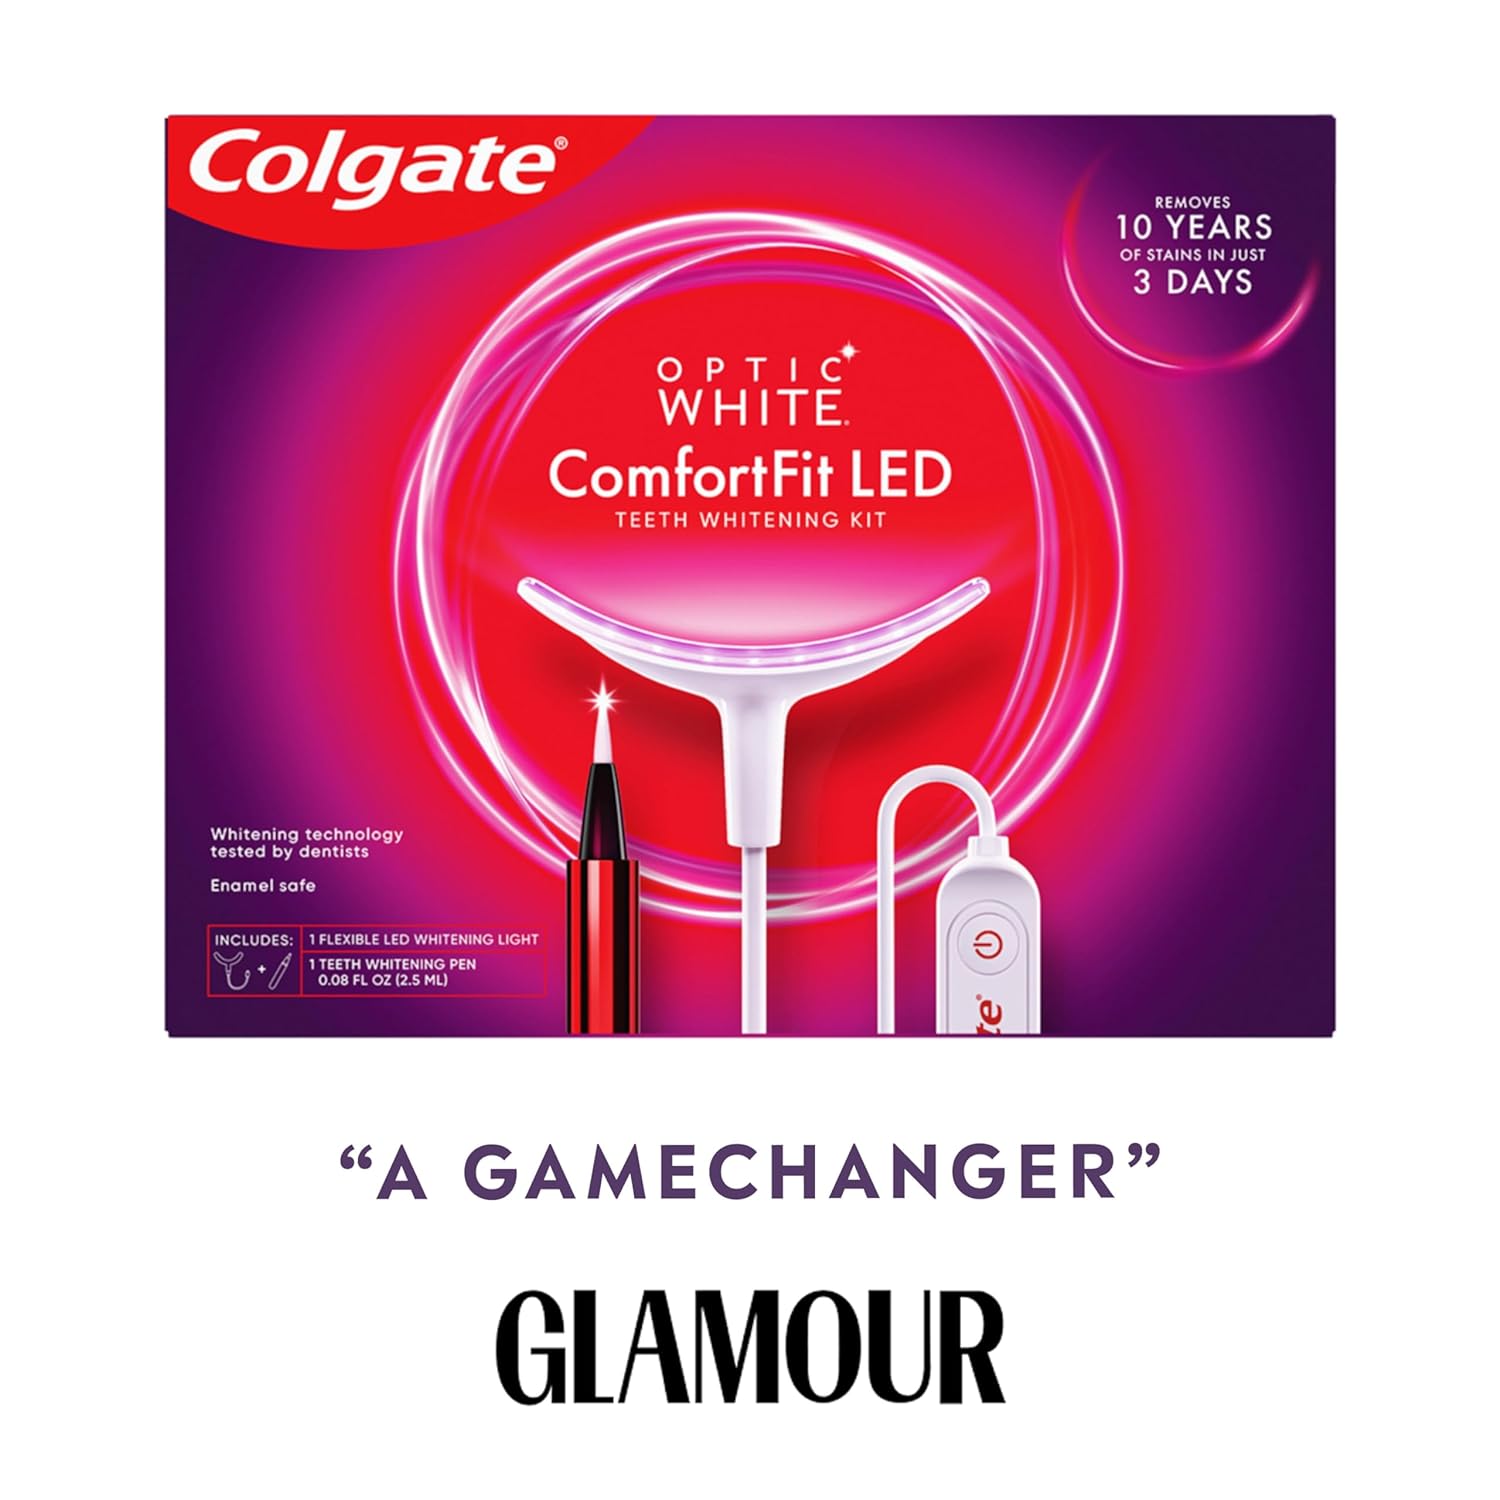 Colgate Optic White ComfortFit Teeth Whitening Kit with LED Light and Whitening Pen, LED Teeth Whitening Kit, Enamel Safe, Works with iPhone and Android : Clothing, Shoes & Jewelry